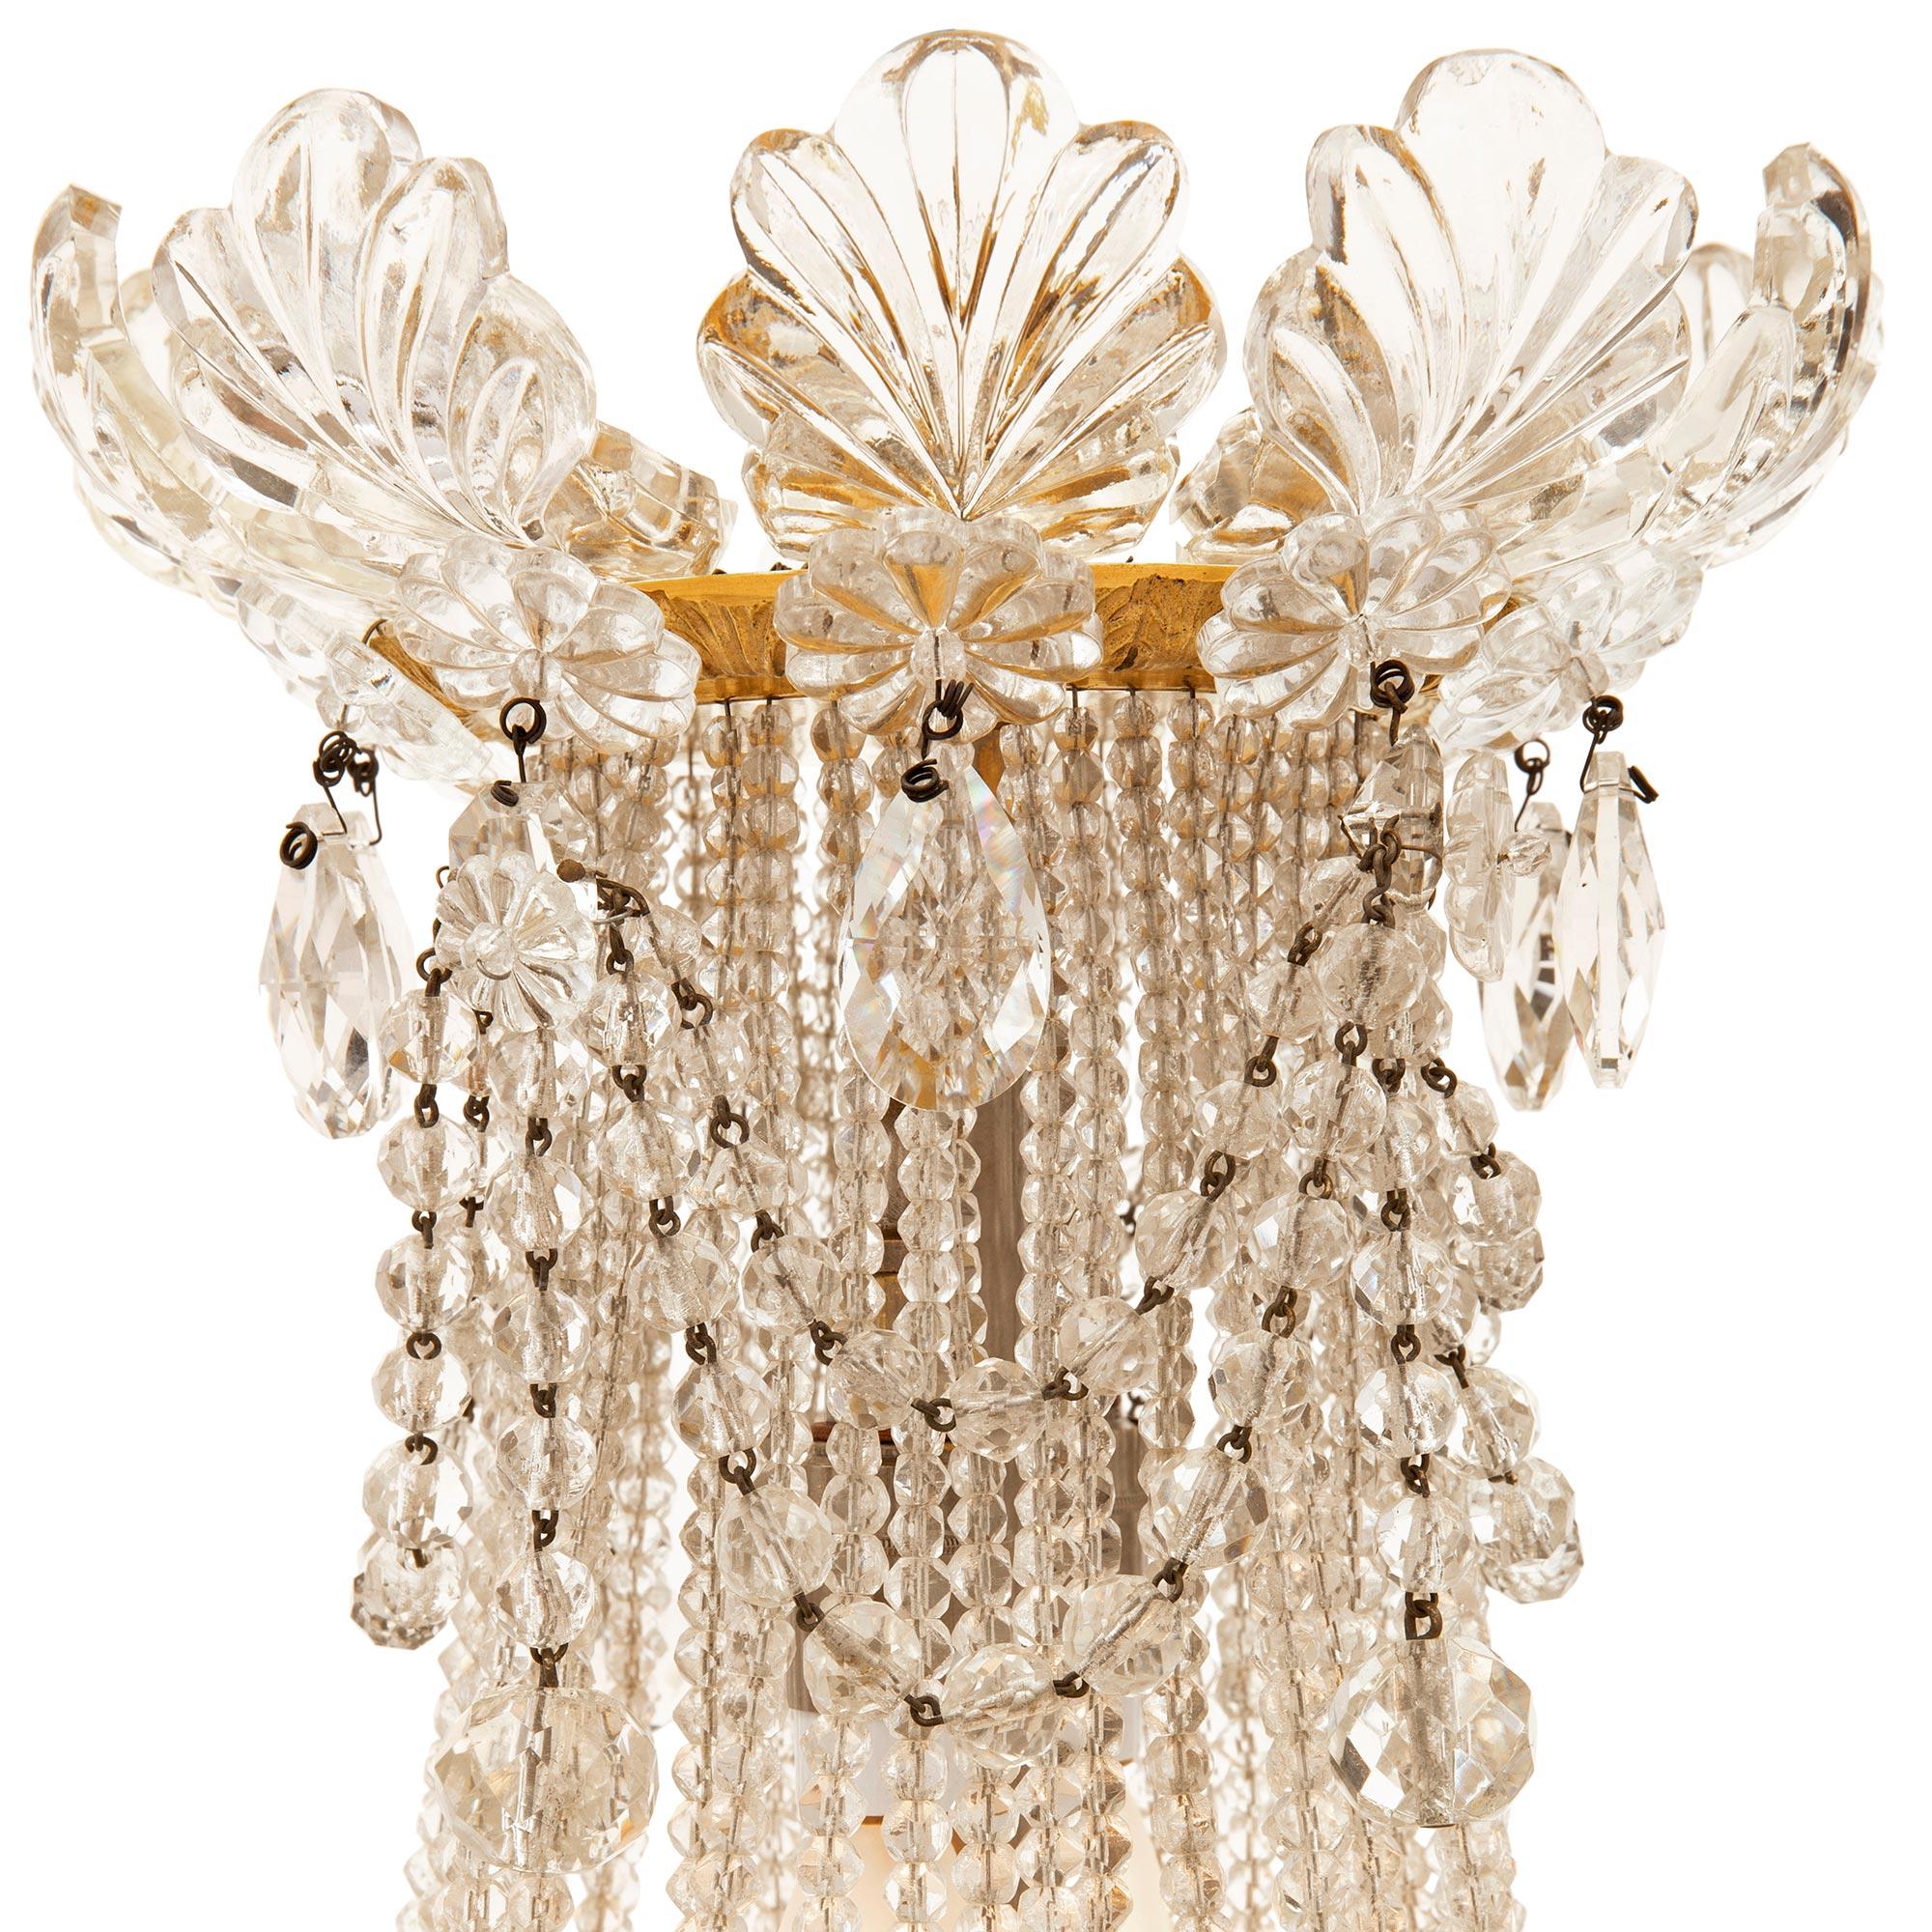 French 19th Century Belle Époque Period Baccarat Crystal and Ormolu Chandelier In Good Condition For Sale In West Palm Beach, FL